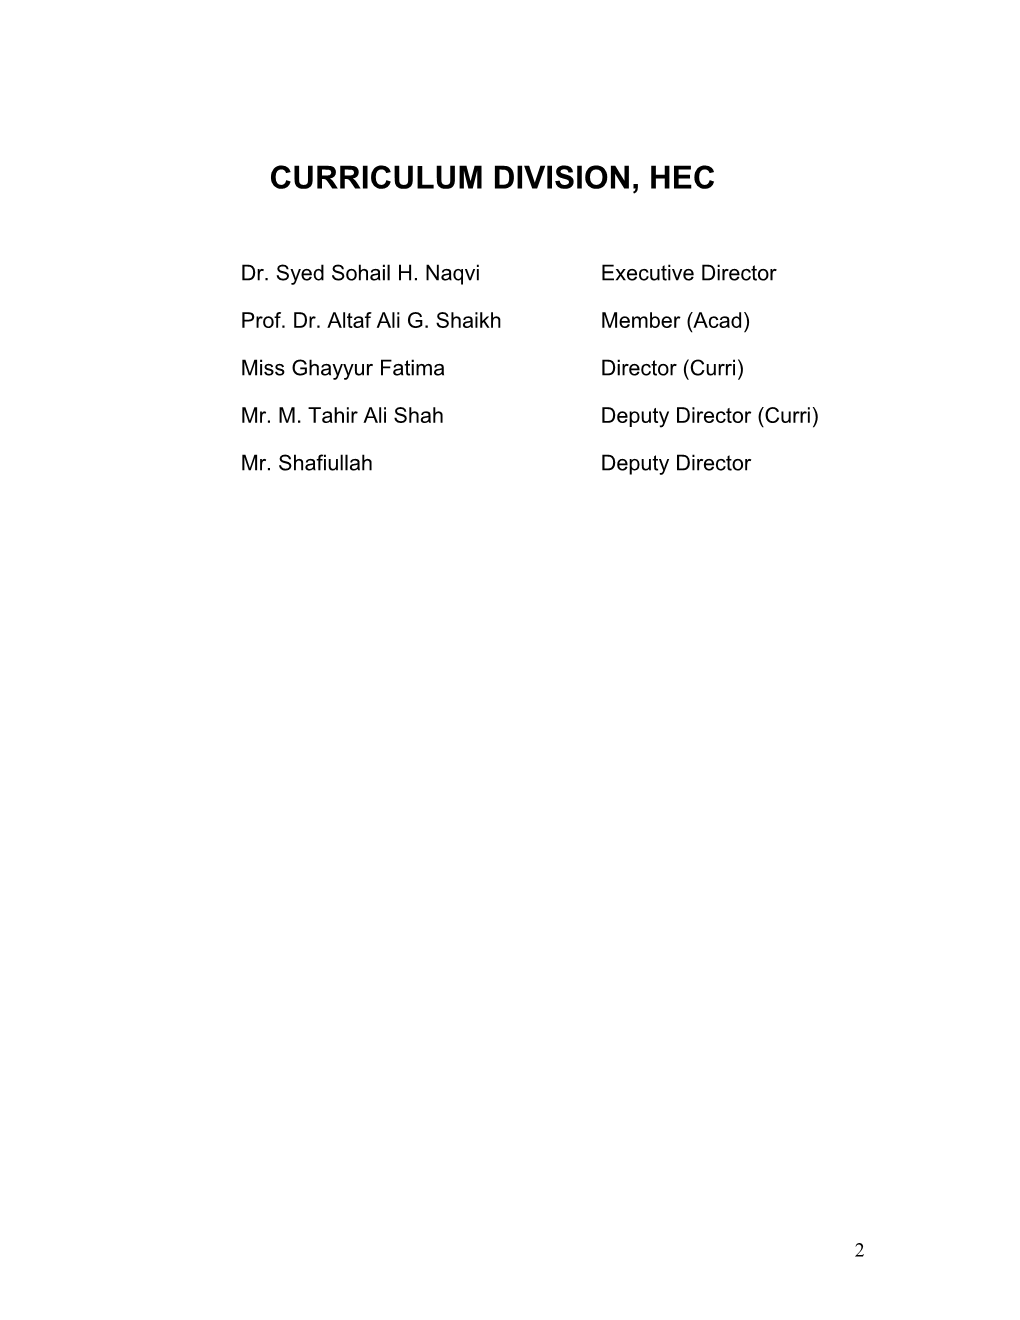 NCRC Computer Engineering Final Document